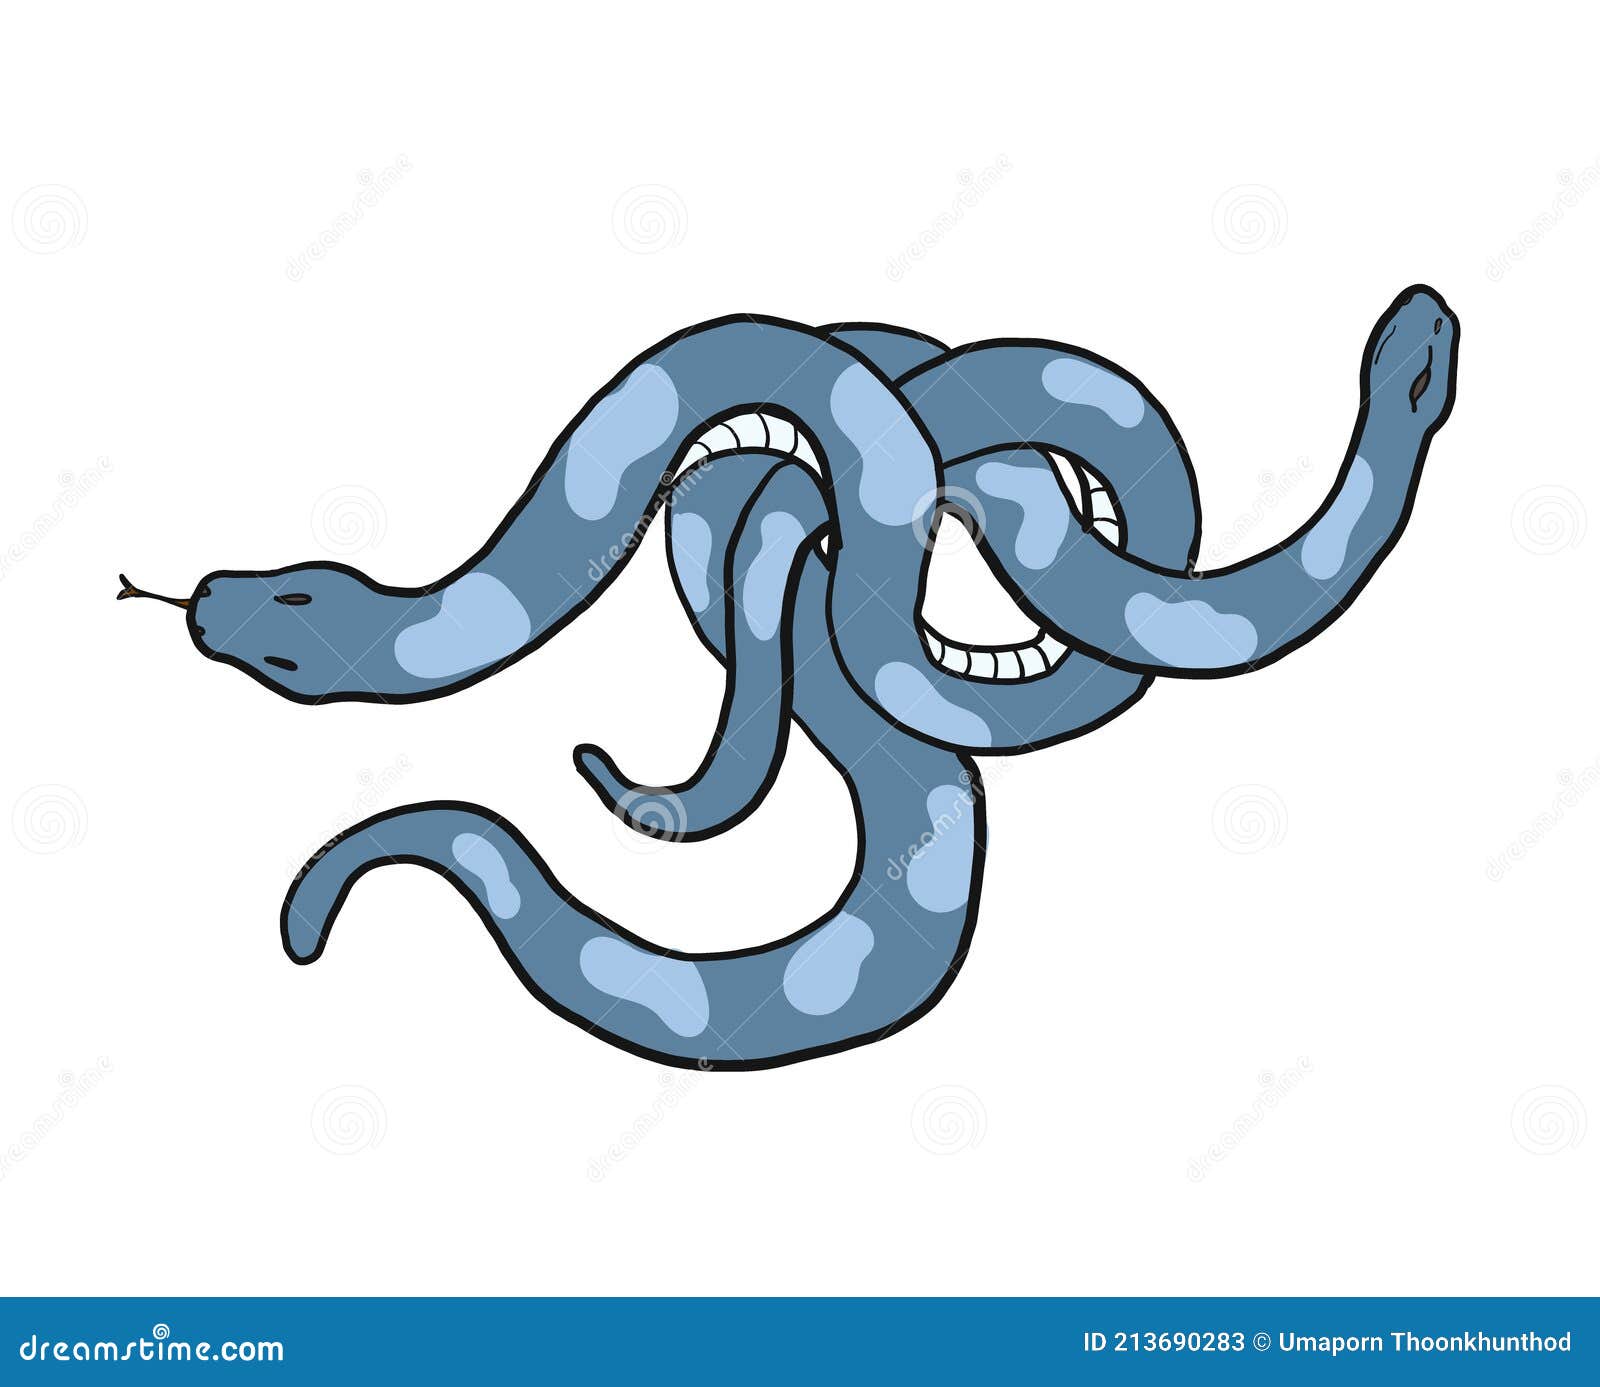 Snake Vector Illustration on  Design Snake Reptile for  Printing and  Sign Vector Such As a Gemini. Stock Illustration  - Illustration of drawing, background: 213690283